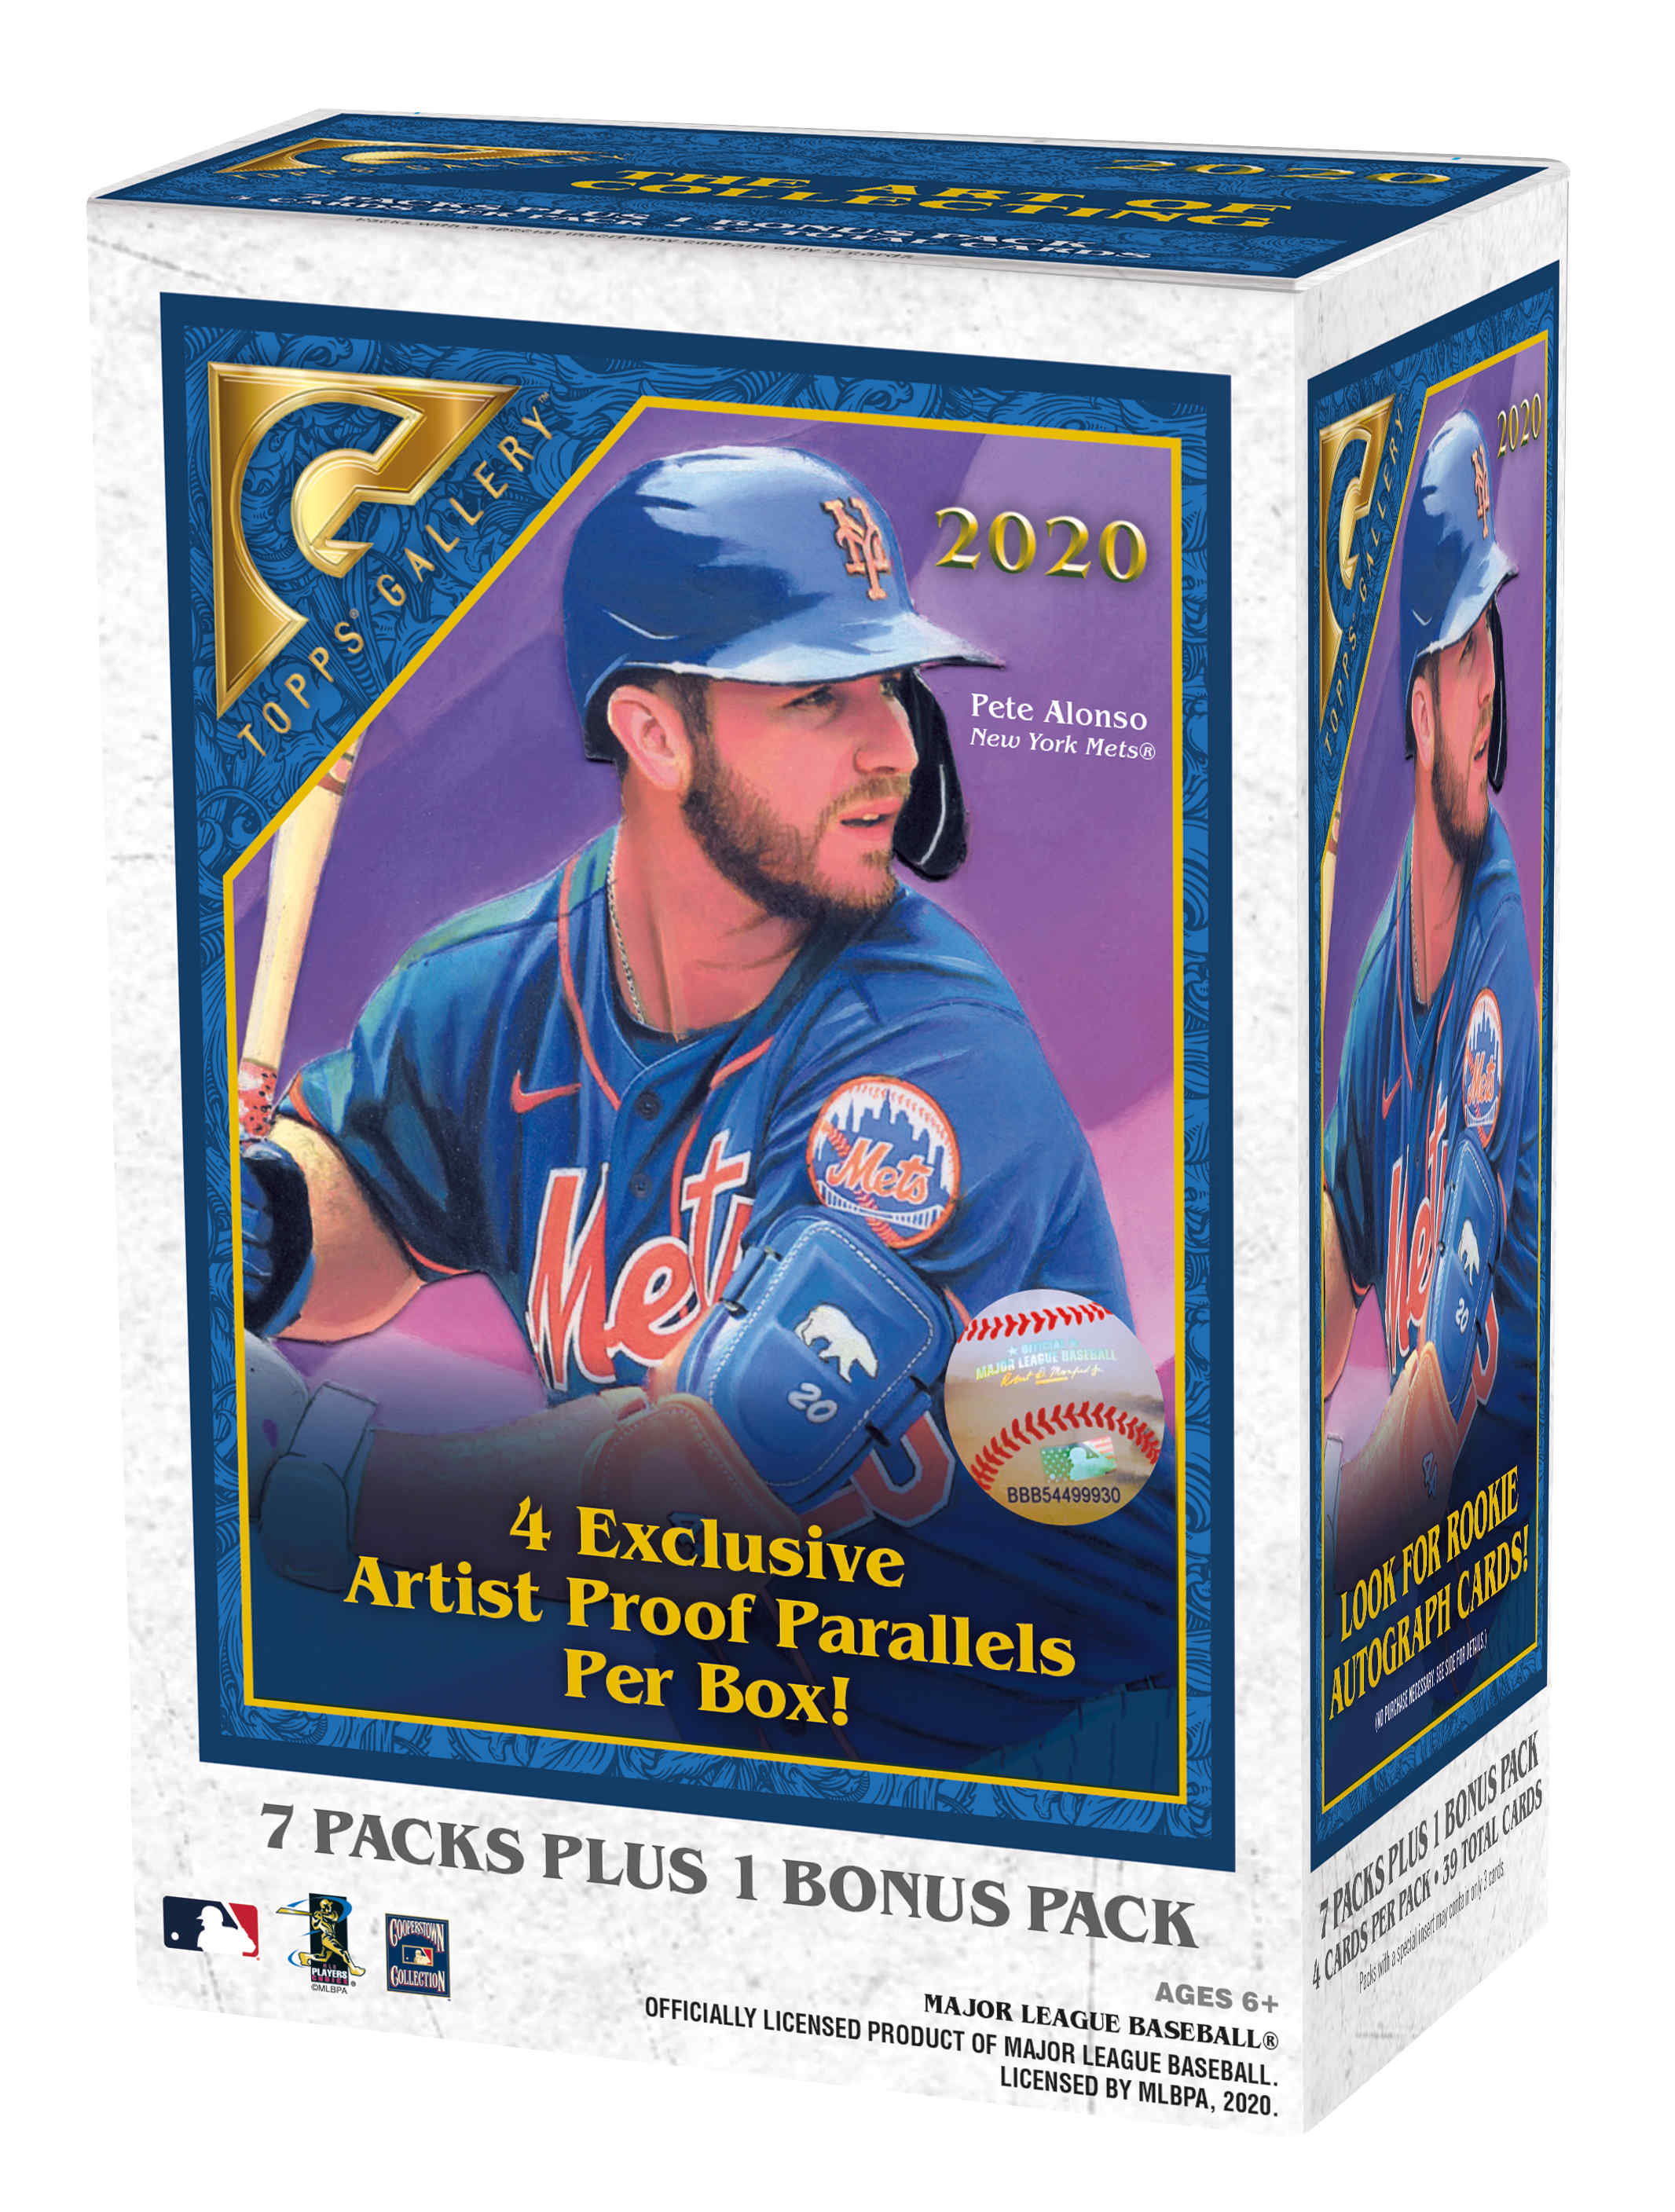 2020 Topps Gallery MLB Baseball Trading Cards Blaster Box- 28 Cards + 1 Exclusive Artist Profile Parallel 4 Pack - image 1 of 2